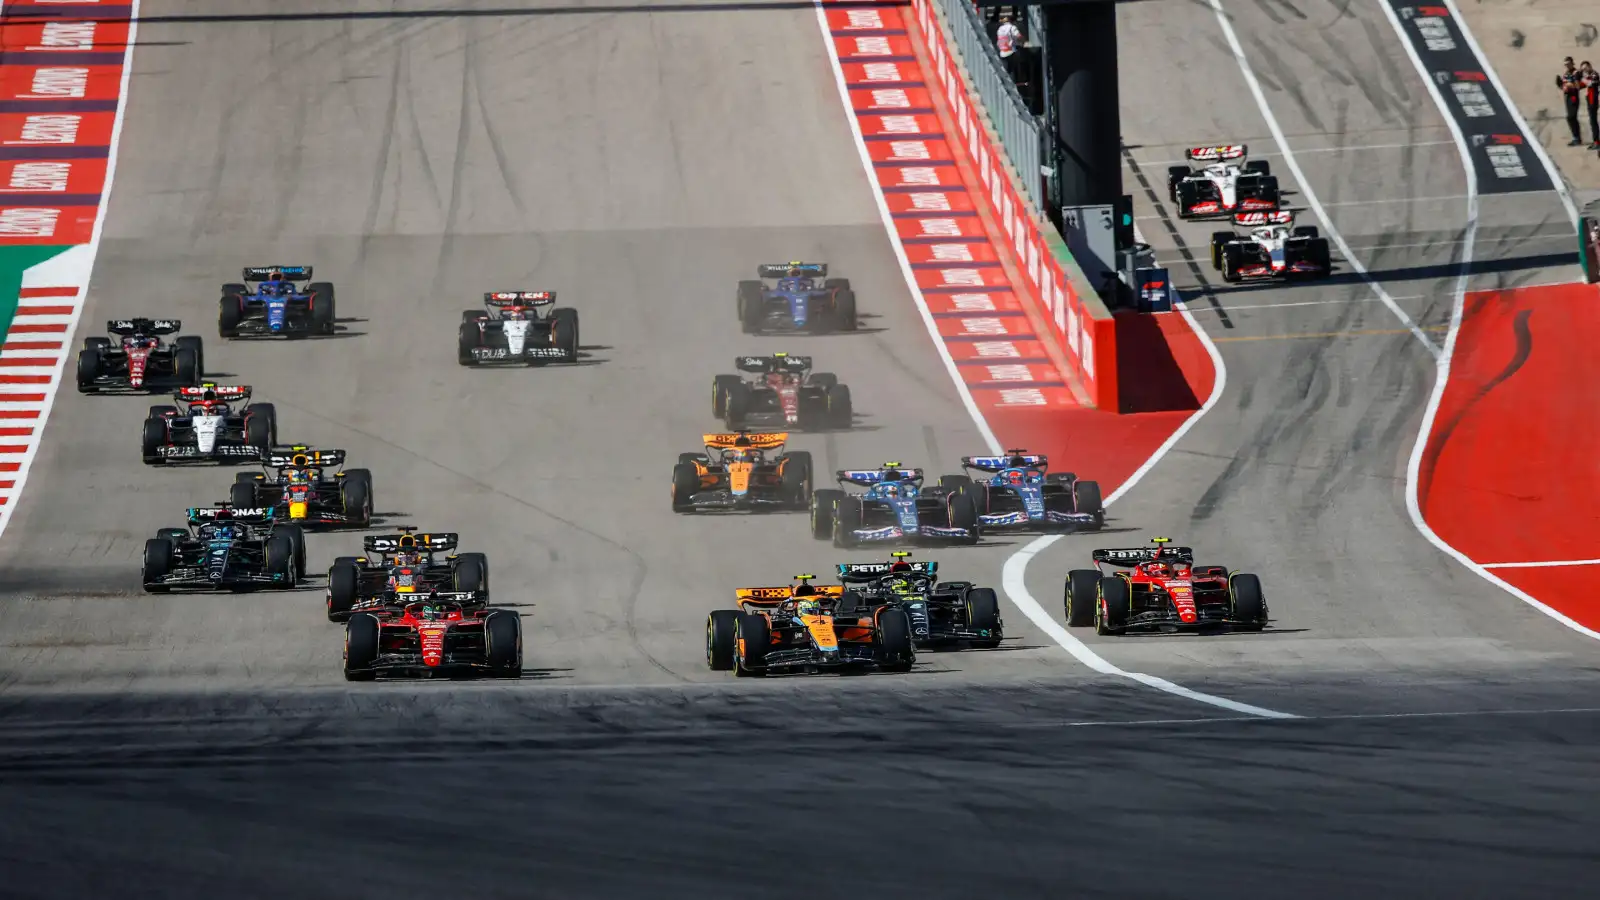 McLaren's Lando Norris takes the lead at the start of the US Grand Prix at COTA.